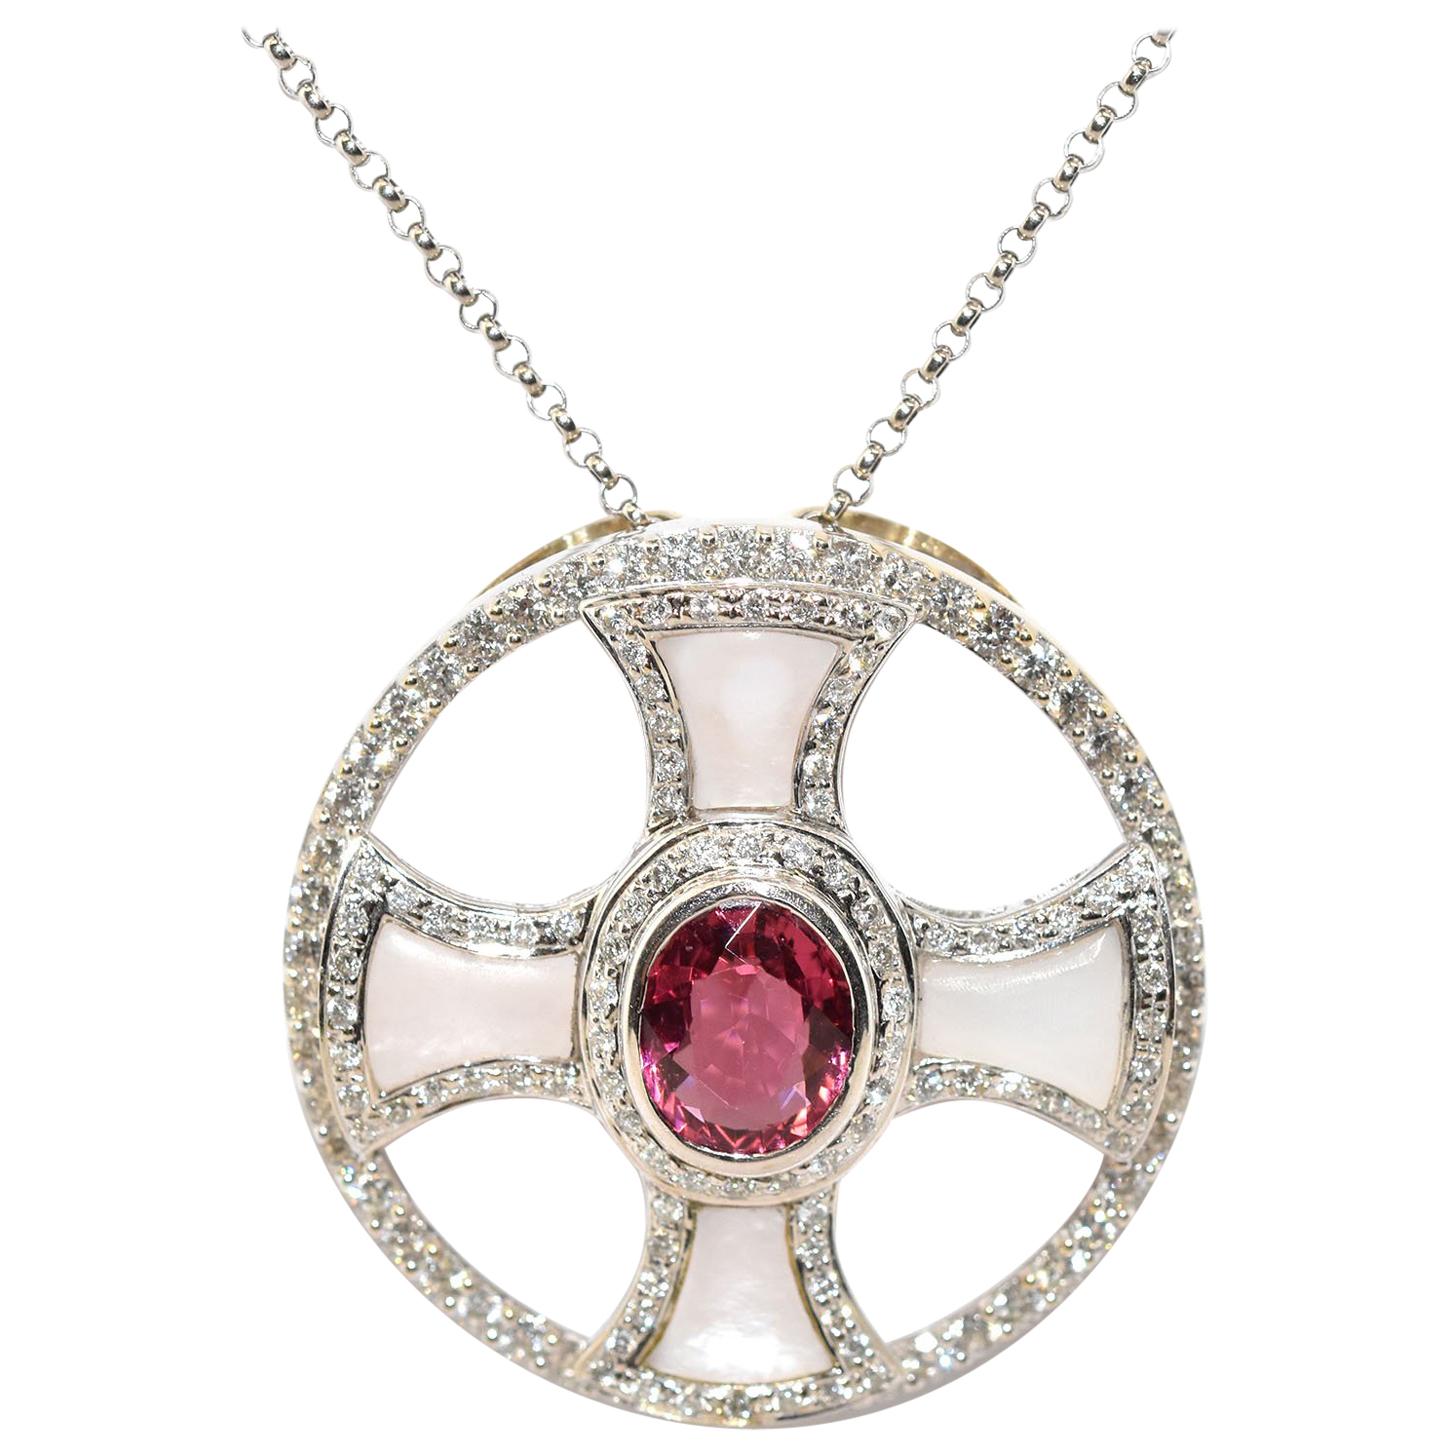 Custom 14 Karat White Gold Diamond, Pink Tourmaline and Mother-of-Pearl Necklace